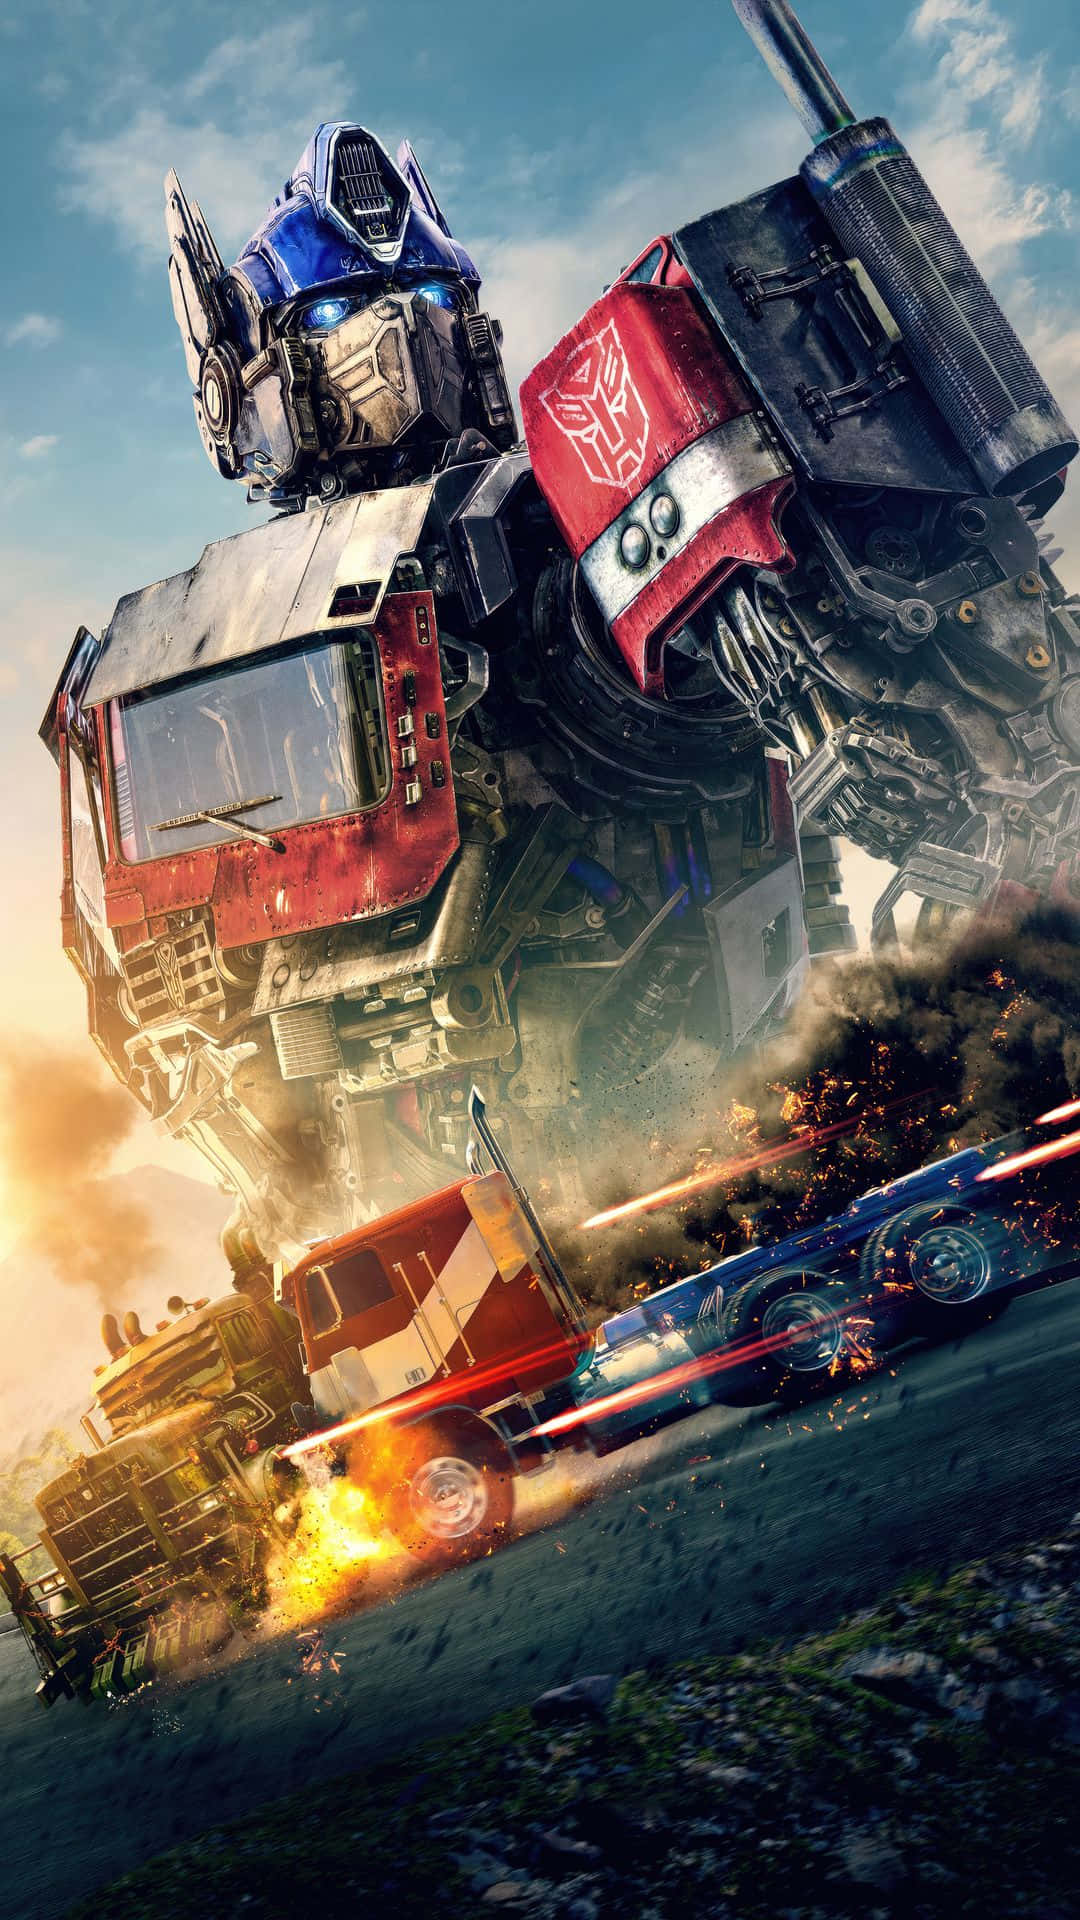 Transformers Rise Of The Beasts Action Scene Wallpaper